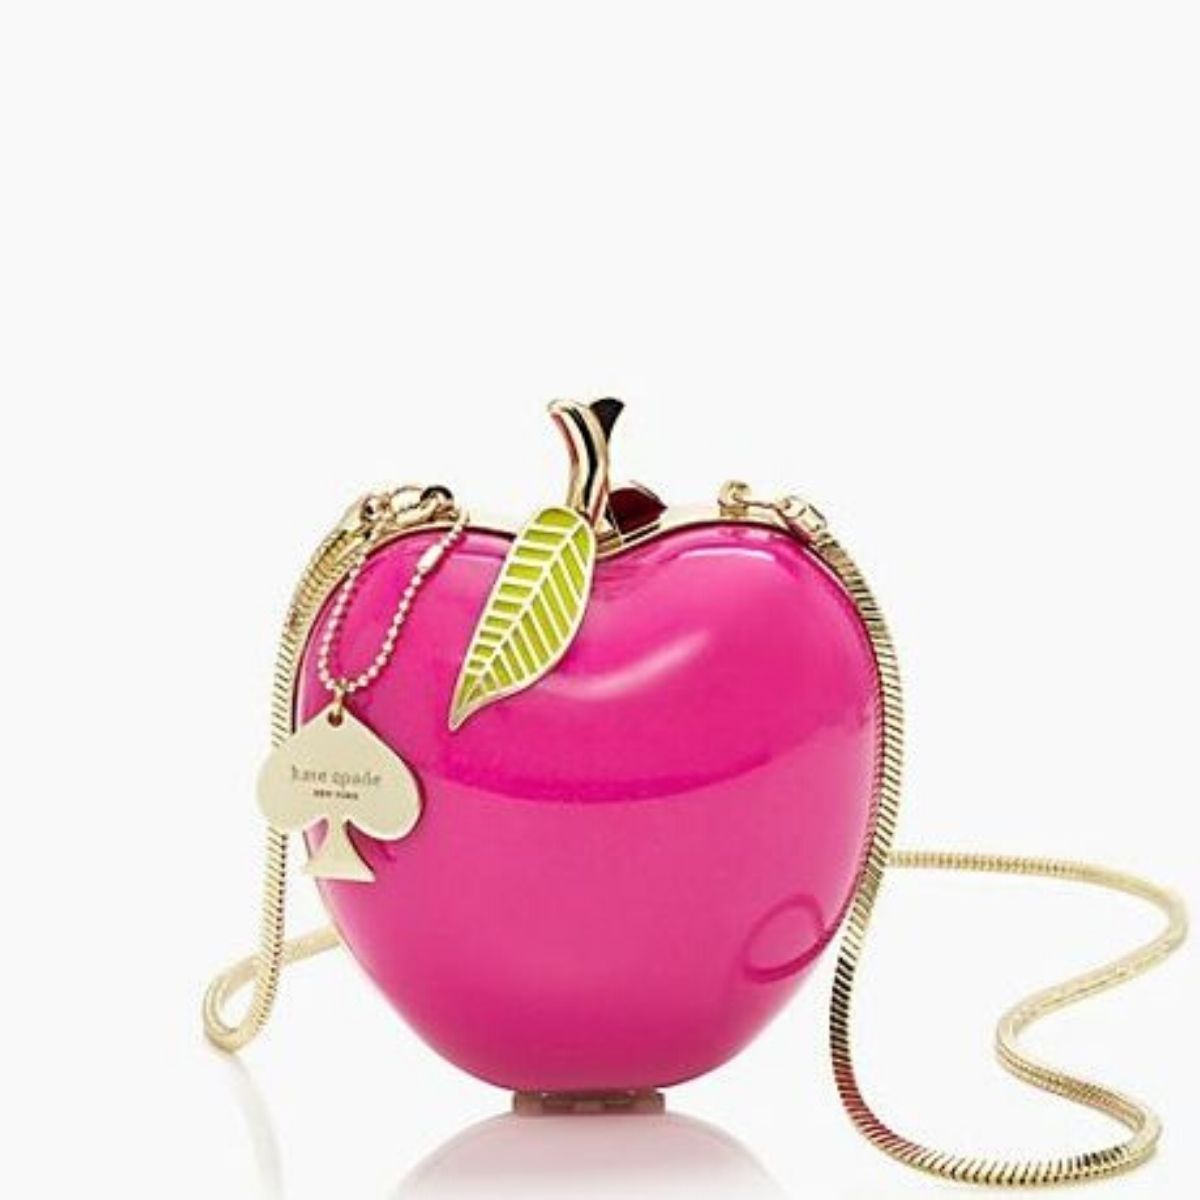 Kate Spade New York Has A Summer Collection Inspired By Fruits